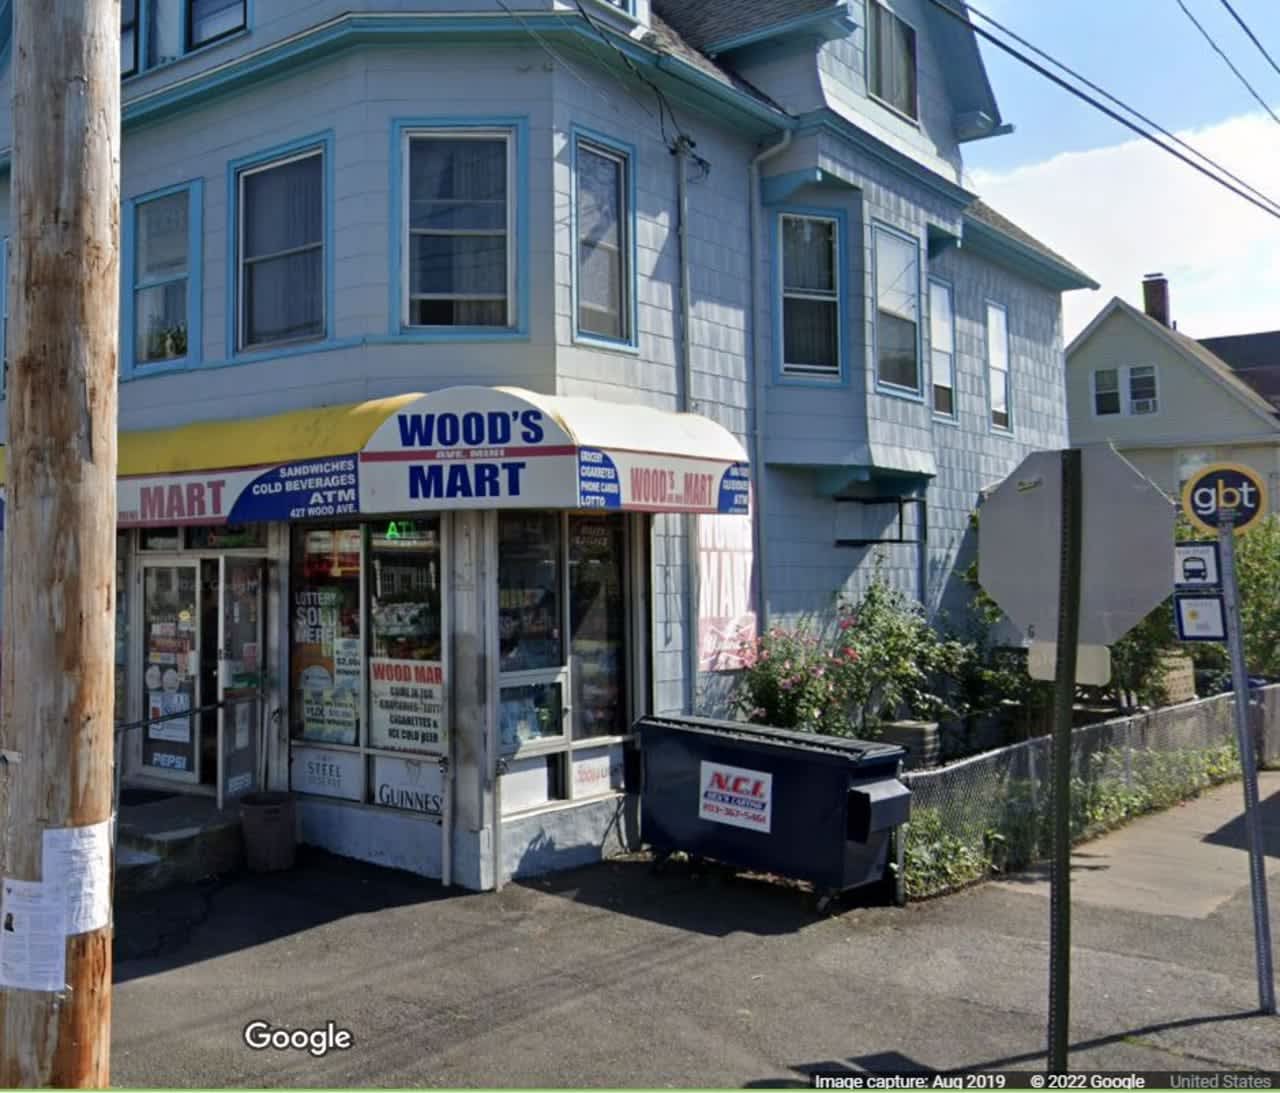 Wood's Mart, located at 427 Wood Ave., in Bridgeport